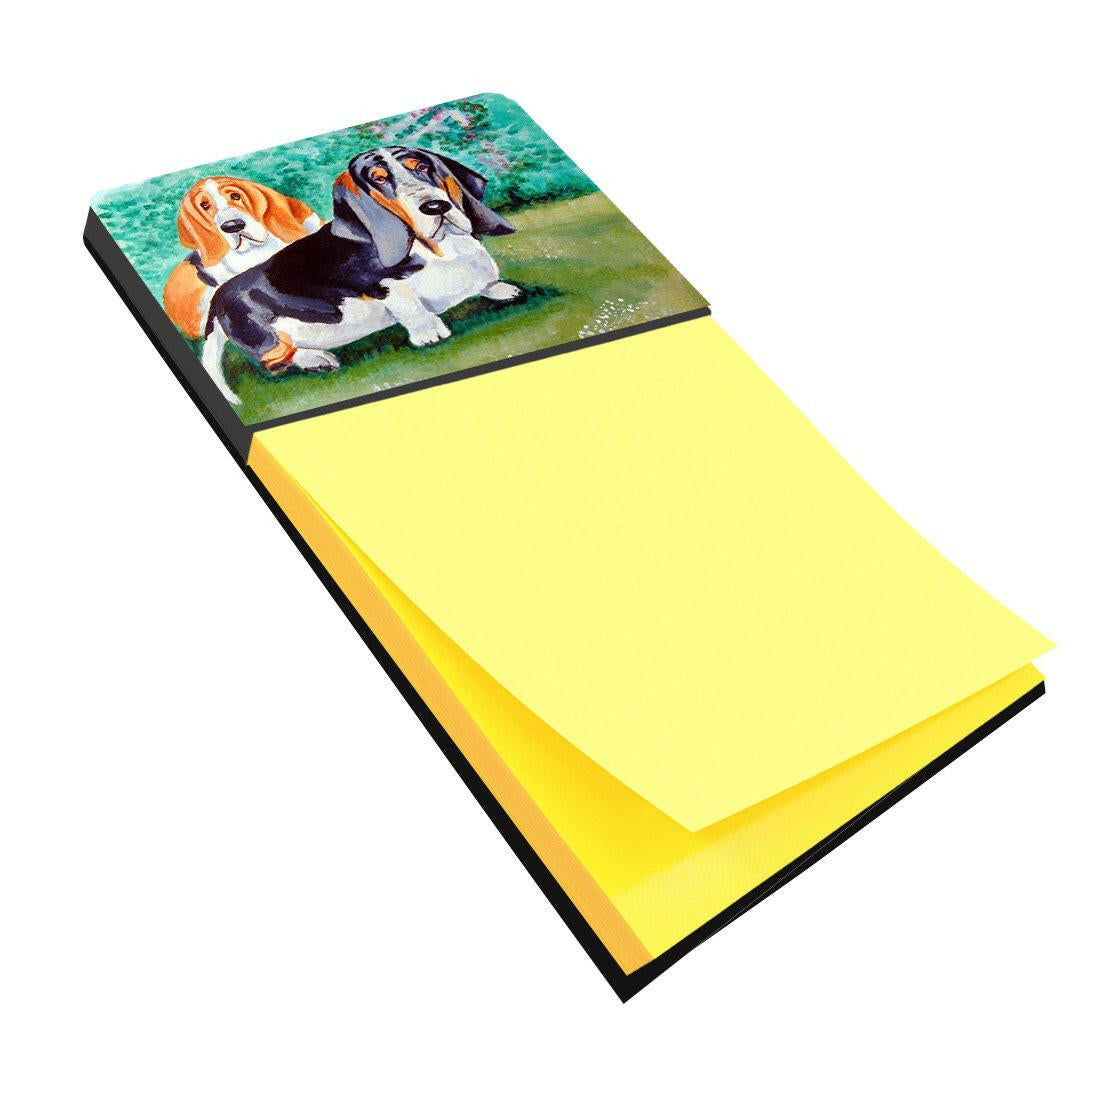 Basset Hound Double Trouble Refiillable Sticky Note Holder or Postit Note Dispenser 7061SN by Caroline's Treasures